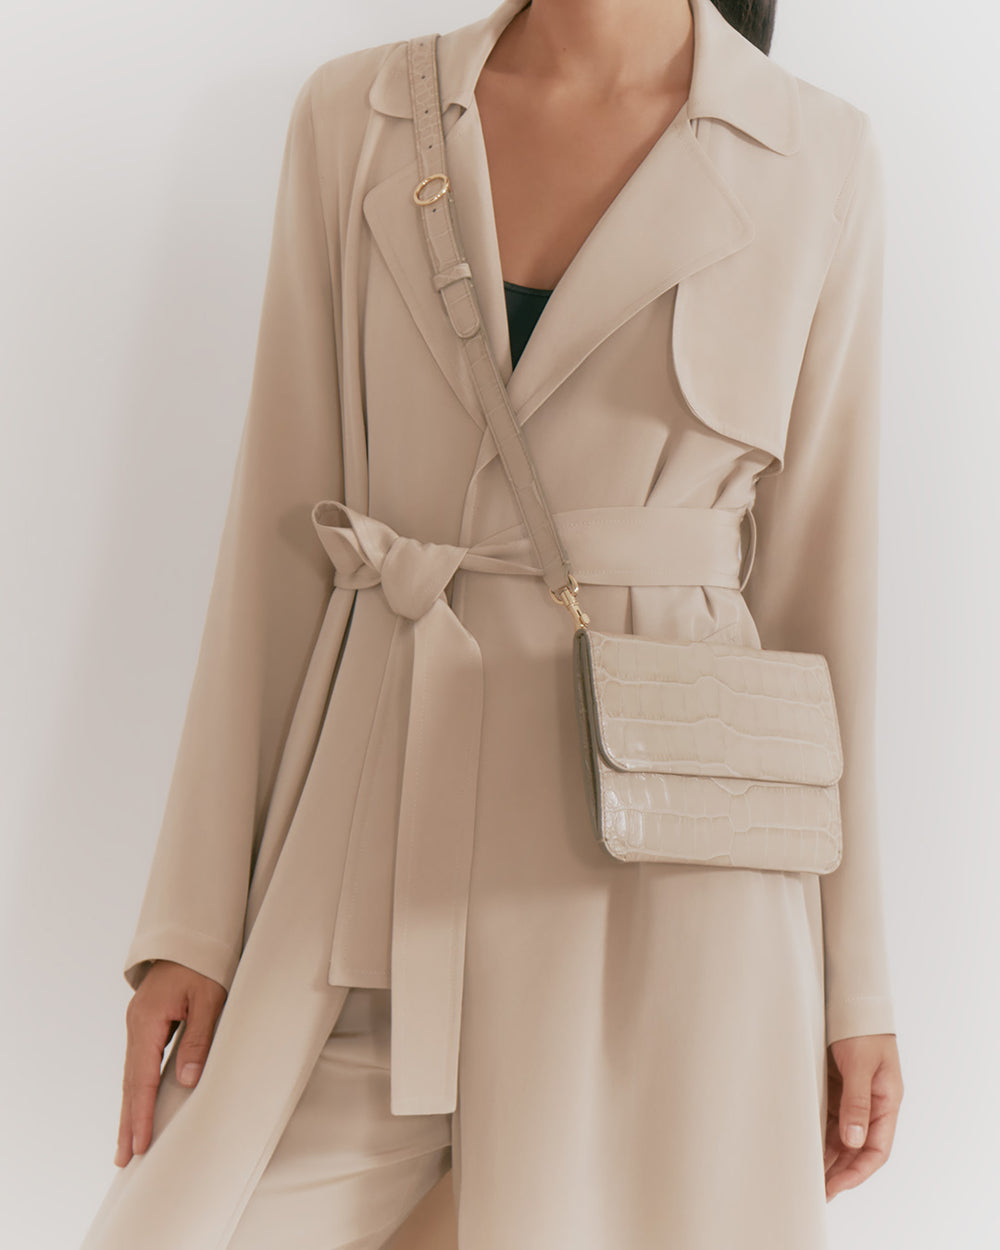 Person in a trench coat wearing a crossbody bag.